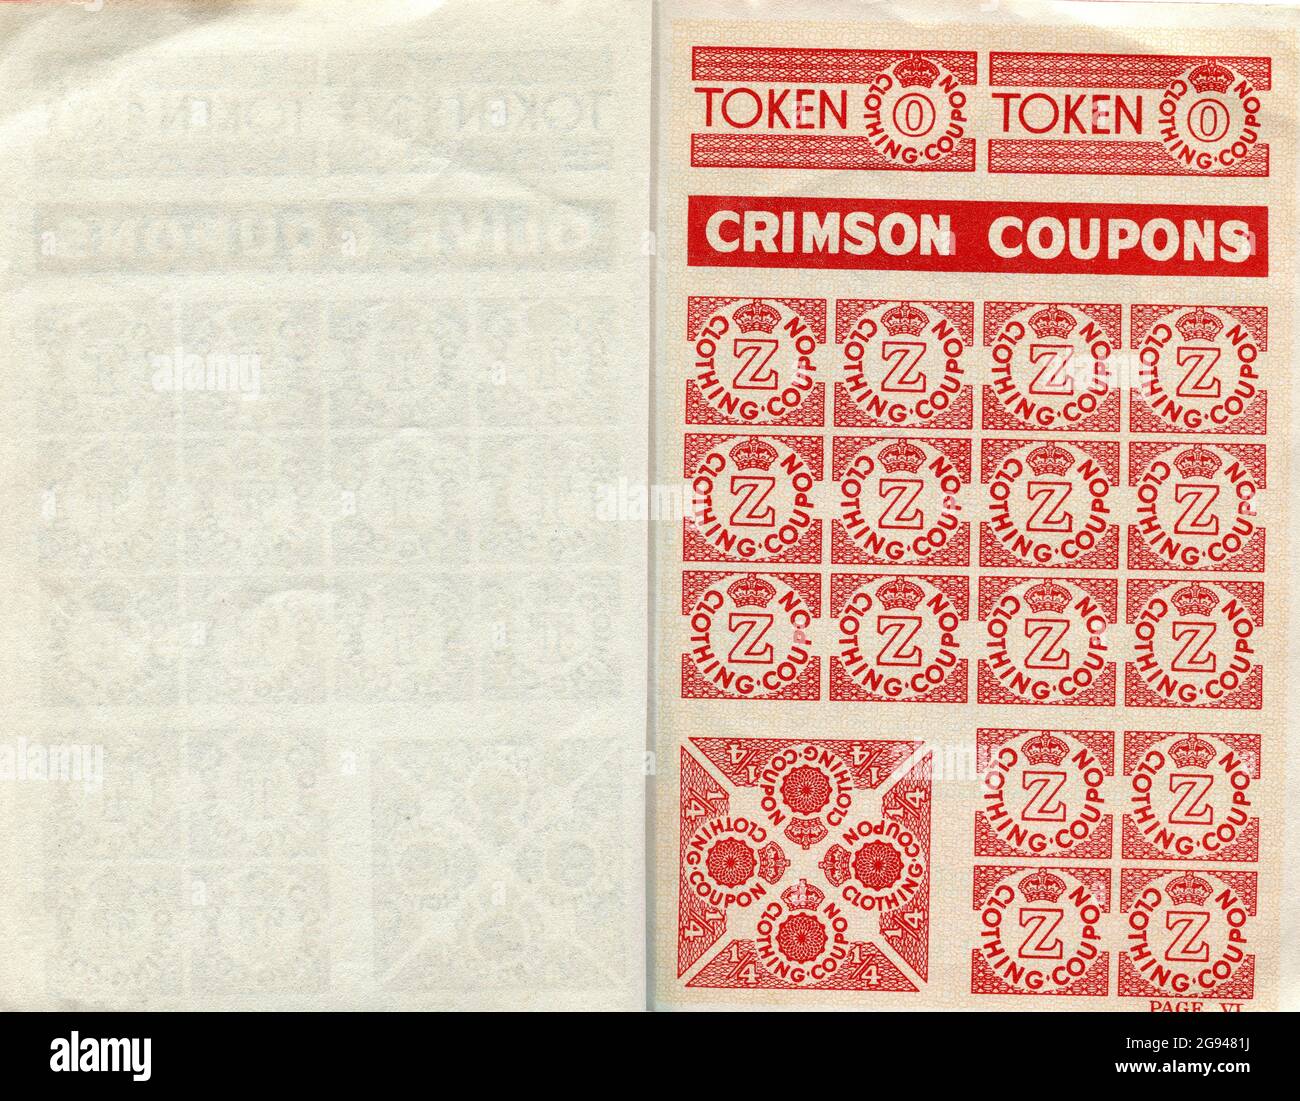 A British clothing ration coupon book. Introduced in 1941 during the Second World War, clothes rationing ended in 1949. Stock Photo